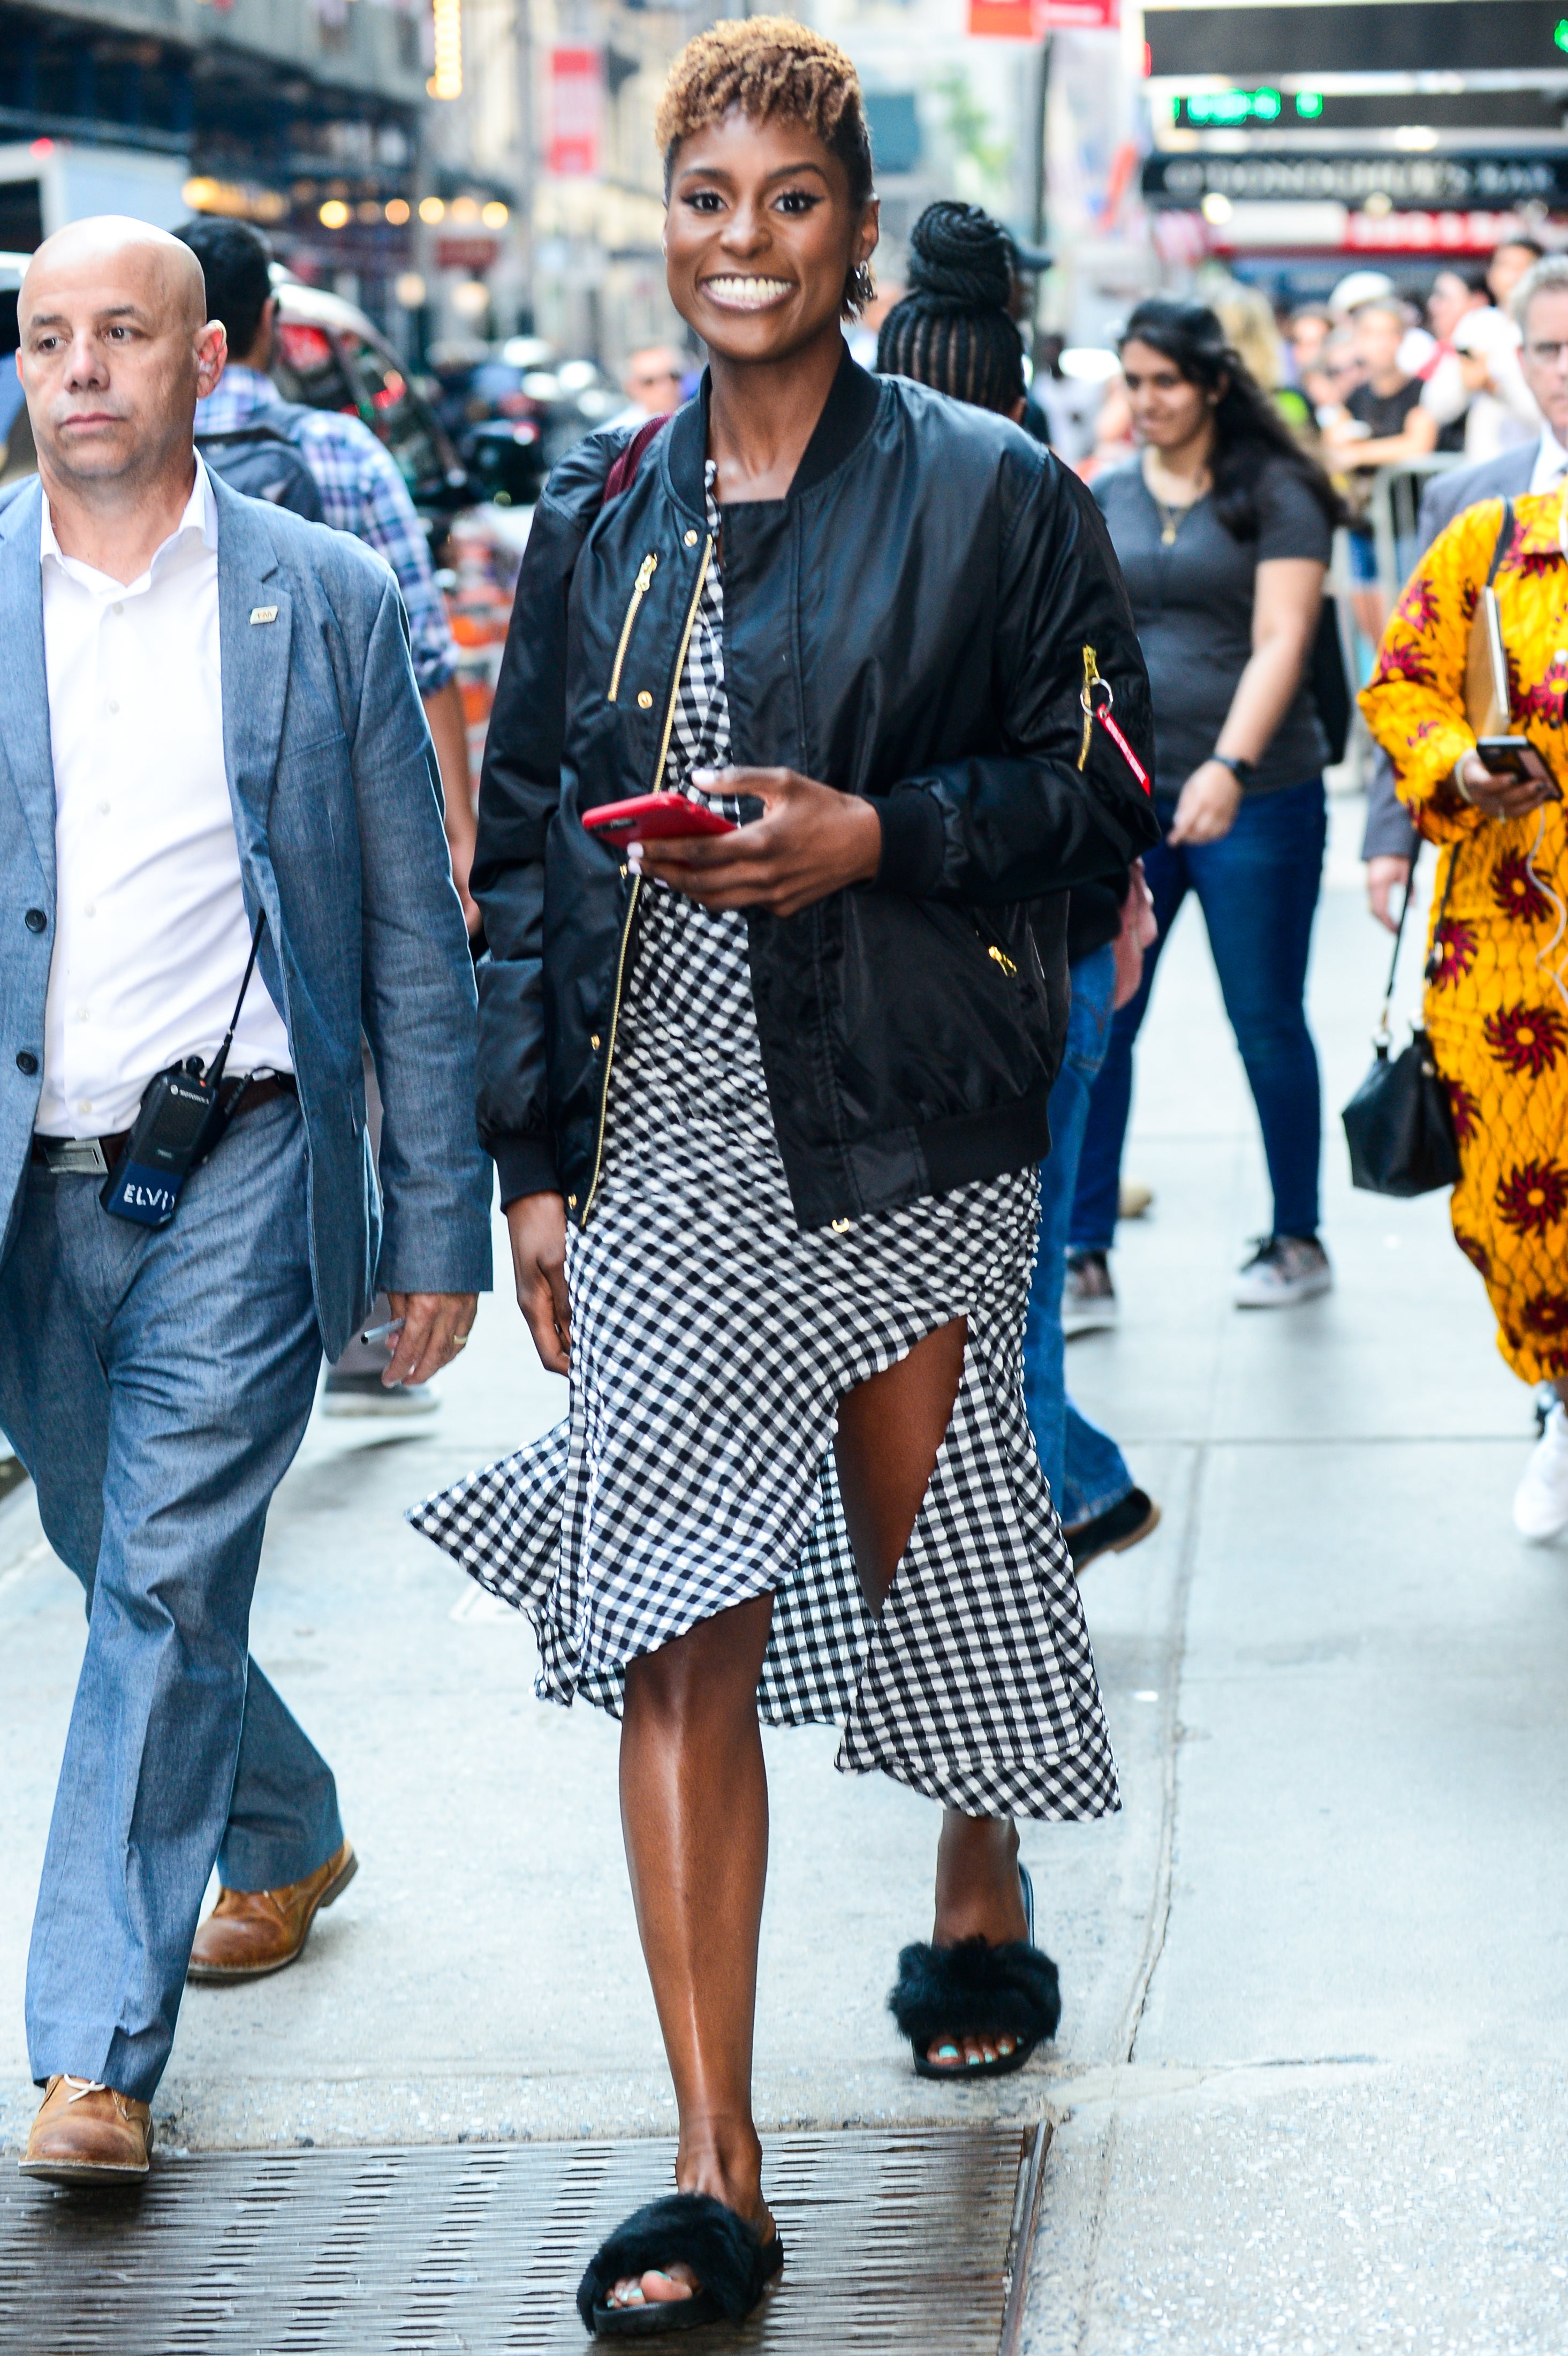 Tracee Ellis Ross, Tiffany Haddish, Tyra Banks and More Celebs Out and About
